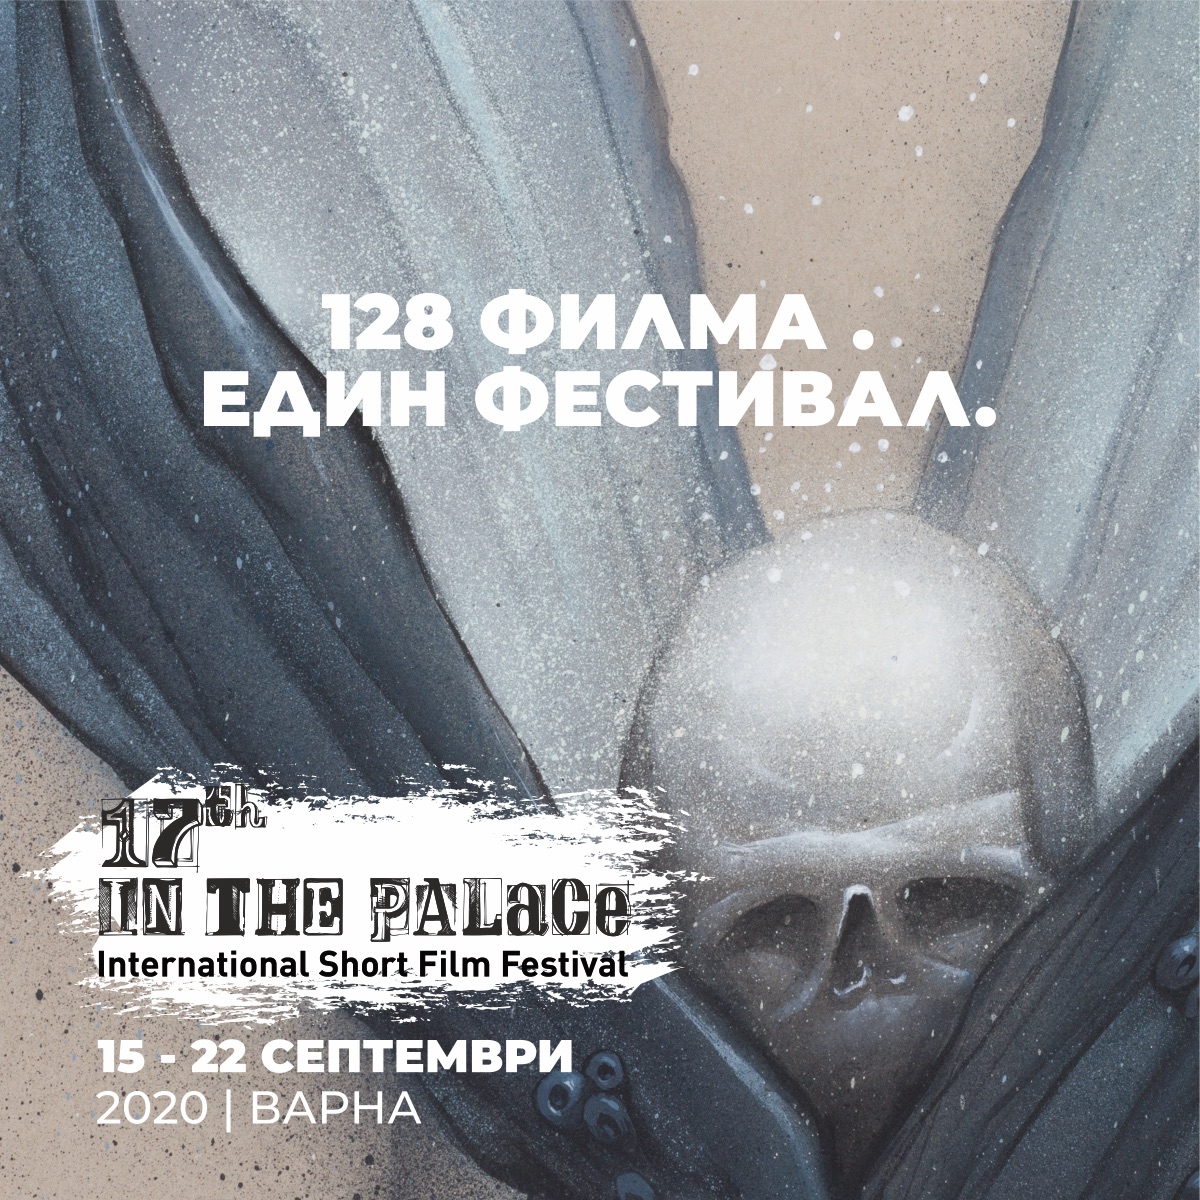            IN THE PALACE International Short Film Festival